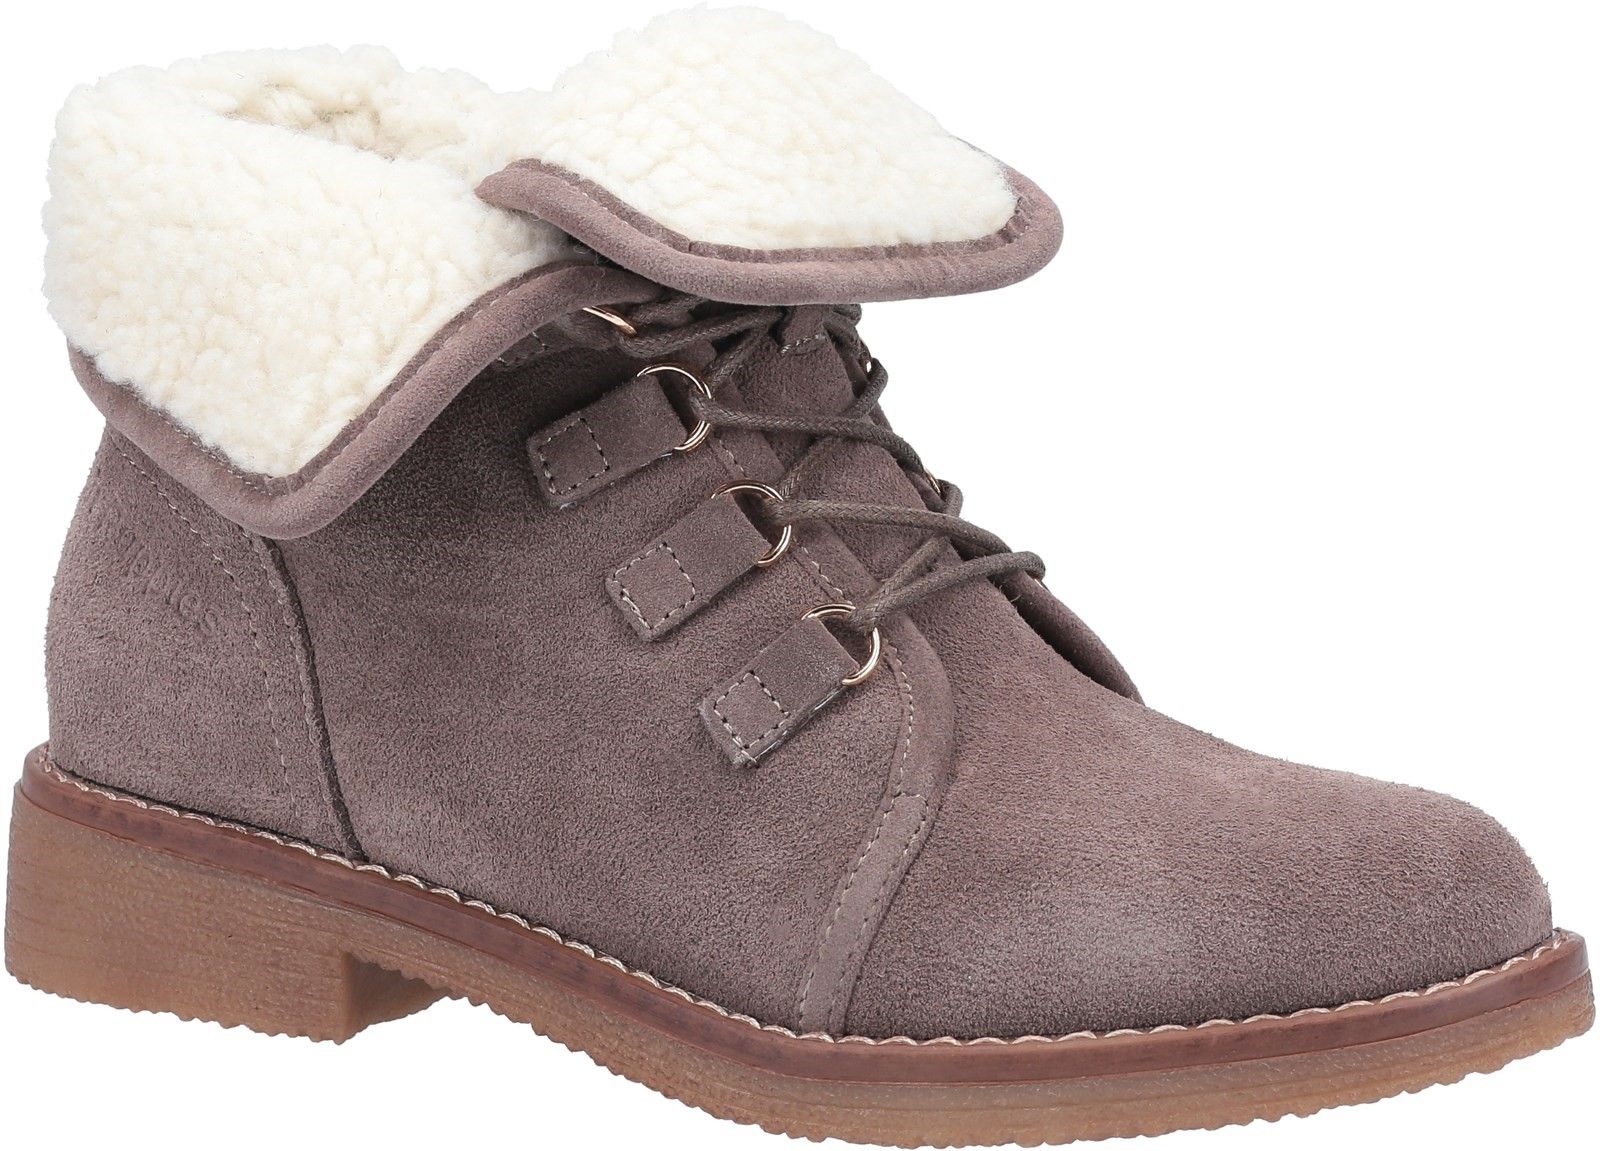 The Milo cosy fleece lined ladies boots from Hush Puppies will keep you warm all winter with the fleece lined collar able to be worn up or down and the water resistant suede will keep you looking stylish no matter what weather you run in toWater Resistant Suede Upper with Faux Shearling Collar. 
Collar can be Worn Up or Down. 
Lace Up Fastening for the Perfect Fit. 
Hidden Inside Zip for Ease. 
Super Warm, Cosy and Comfortable Textile Lining.